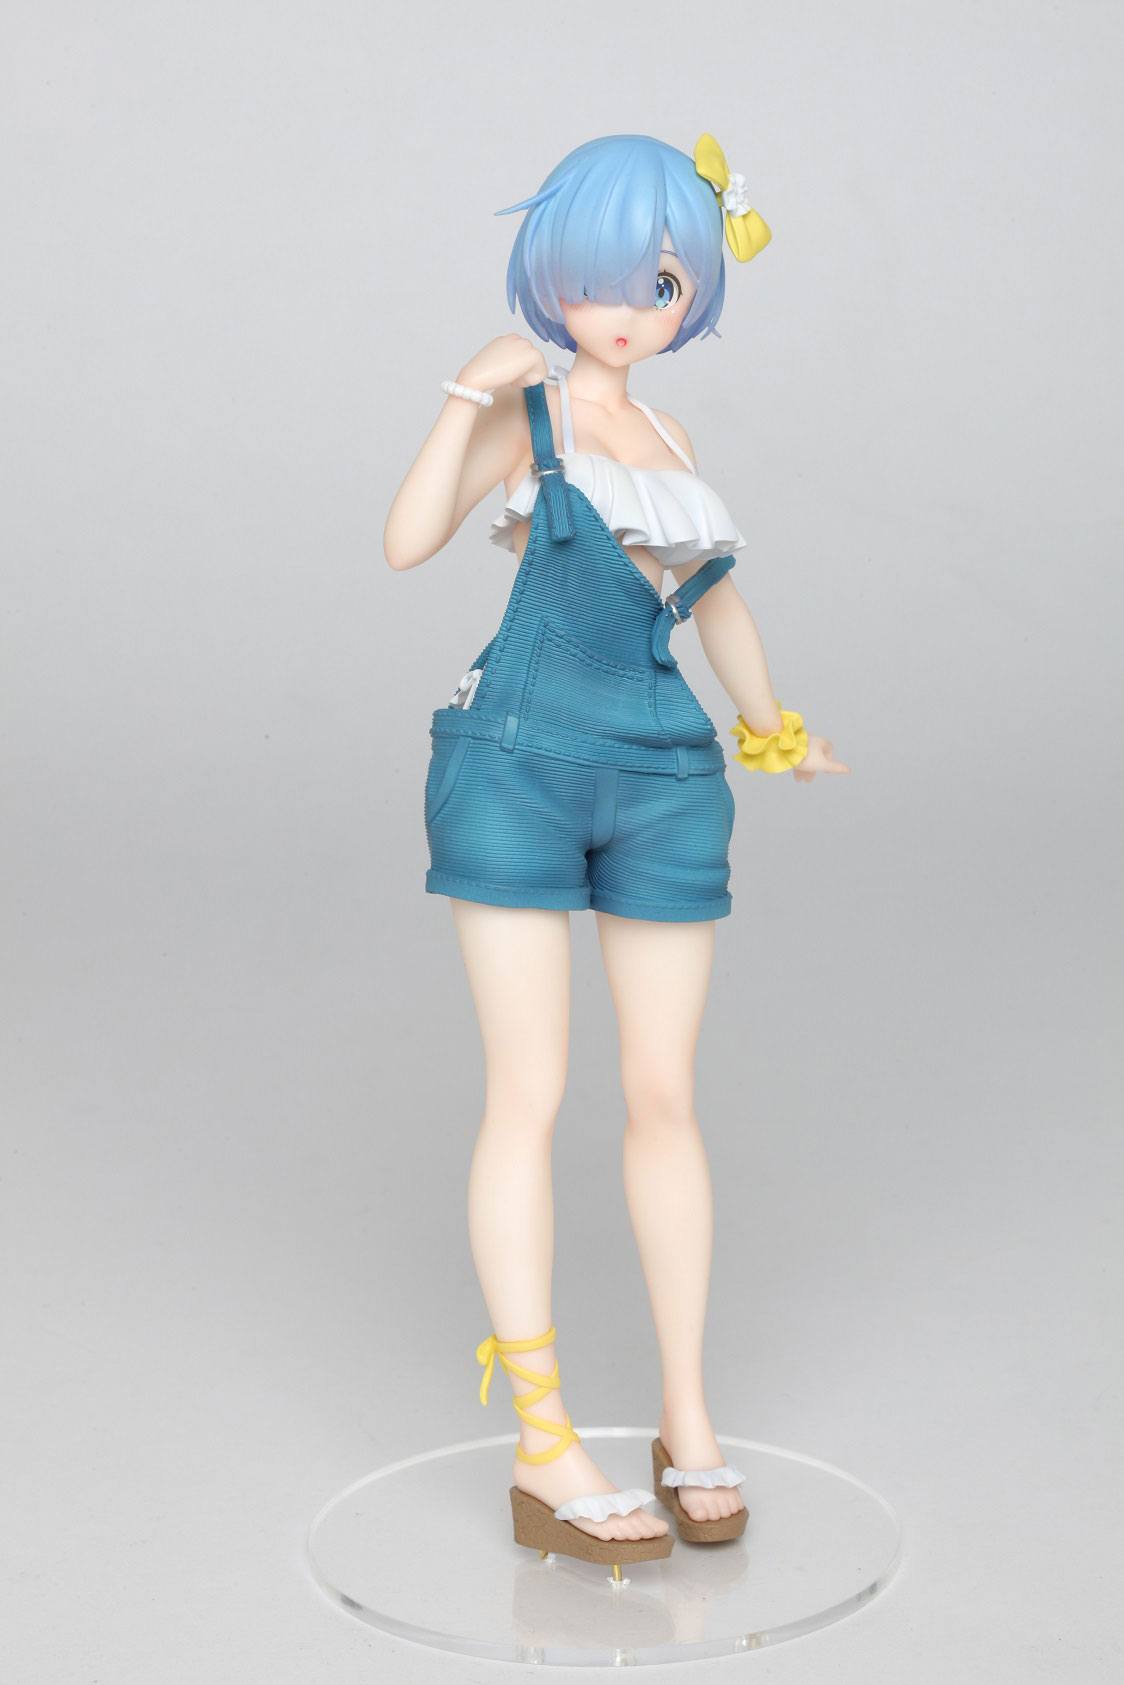 Rem Overalls Ver Figure - Re:ZERO -Starting Life in Another World- - Glacier Hobbies - Taito